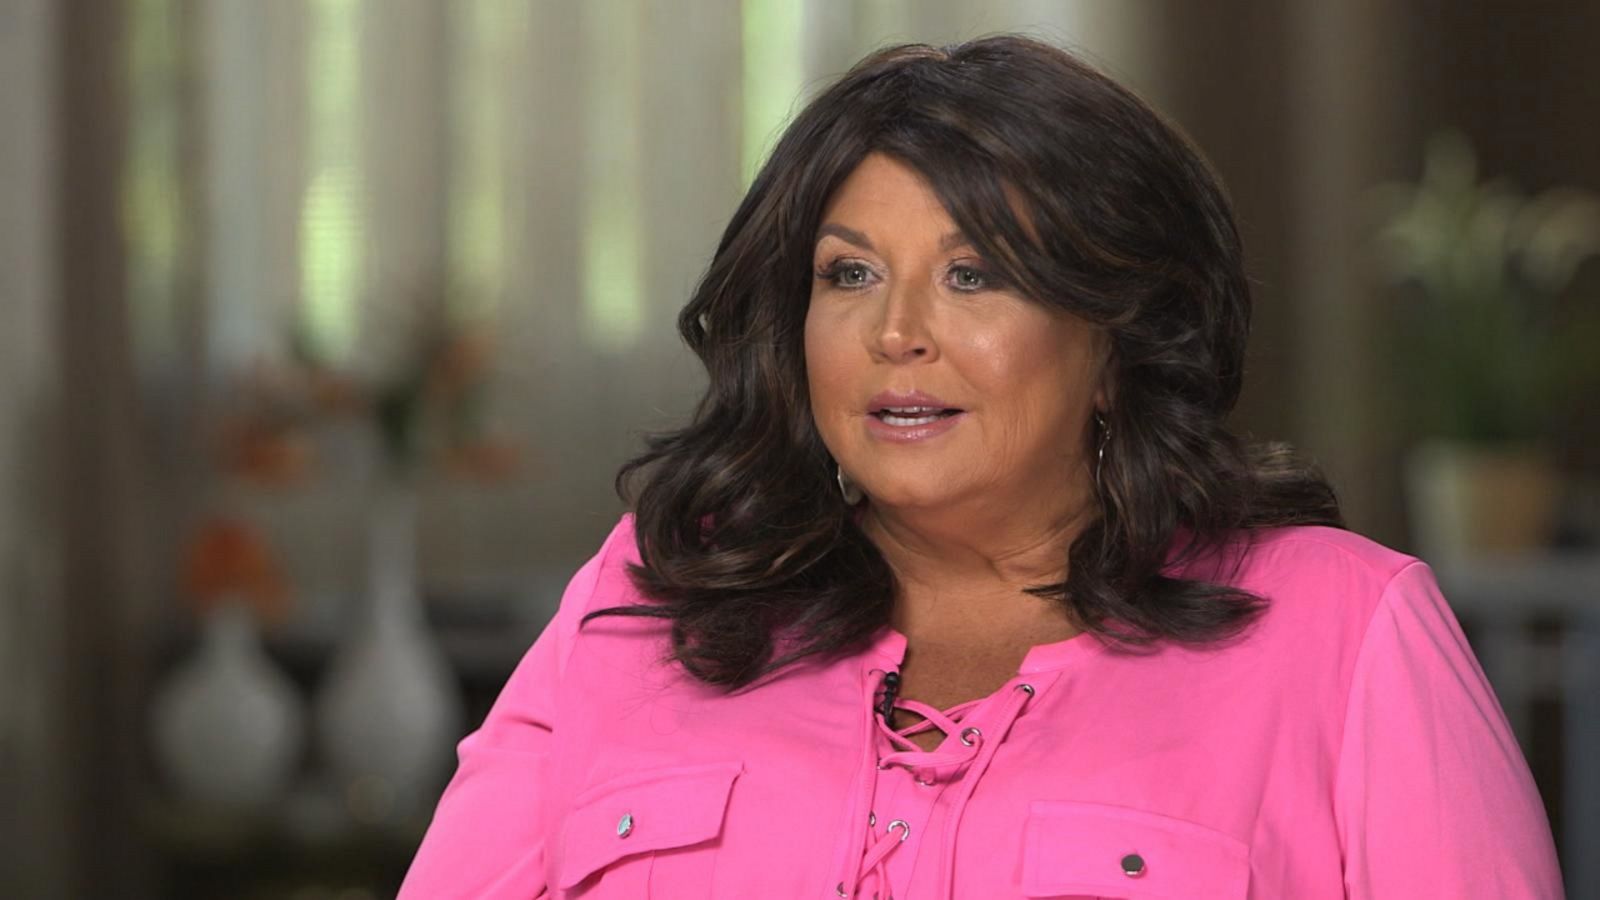 The 'Abby Lee Miller is Dead' Rumor [What's Really Going On